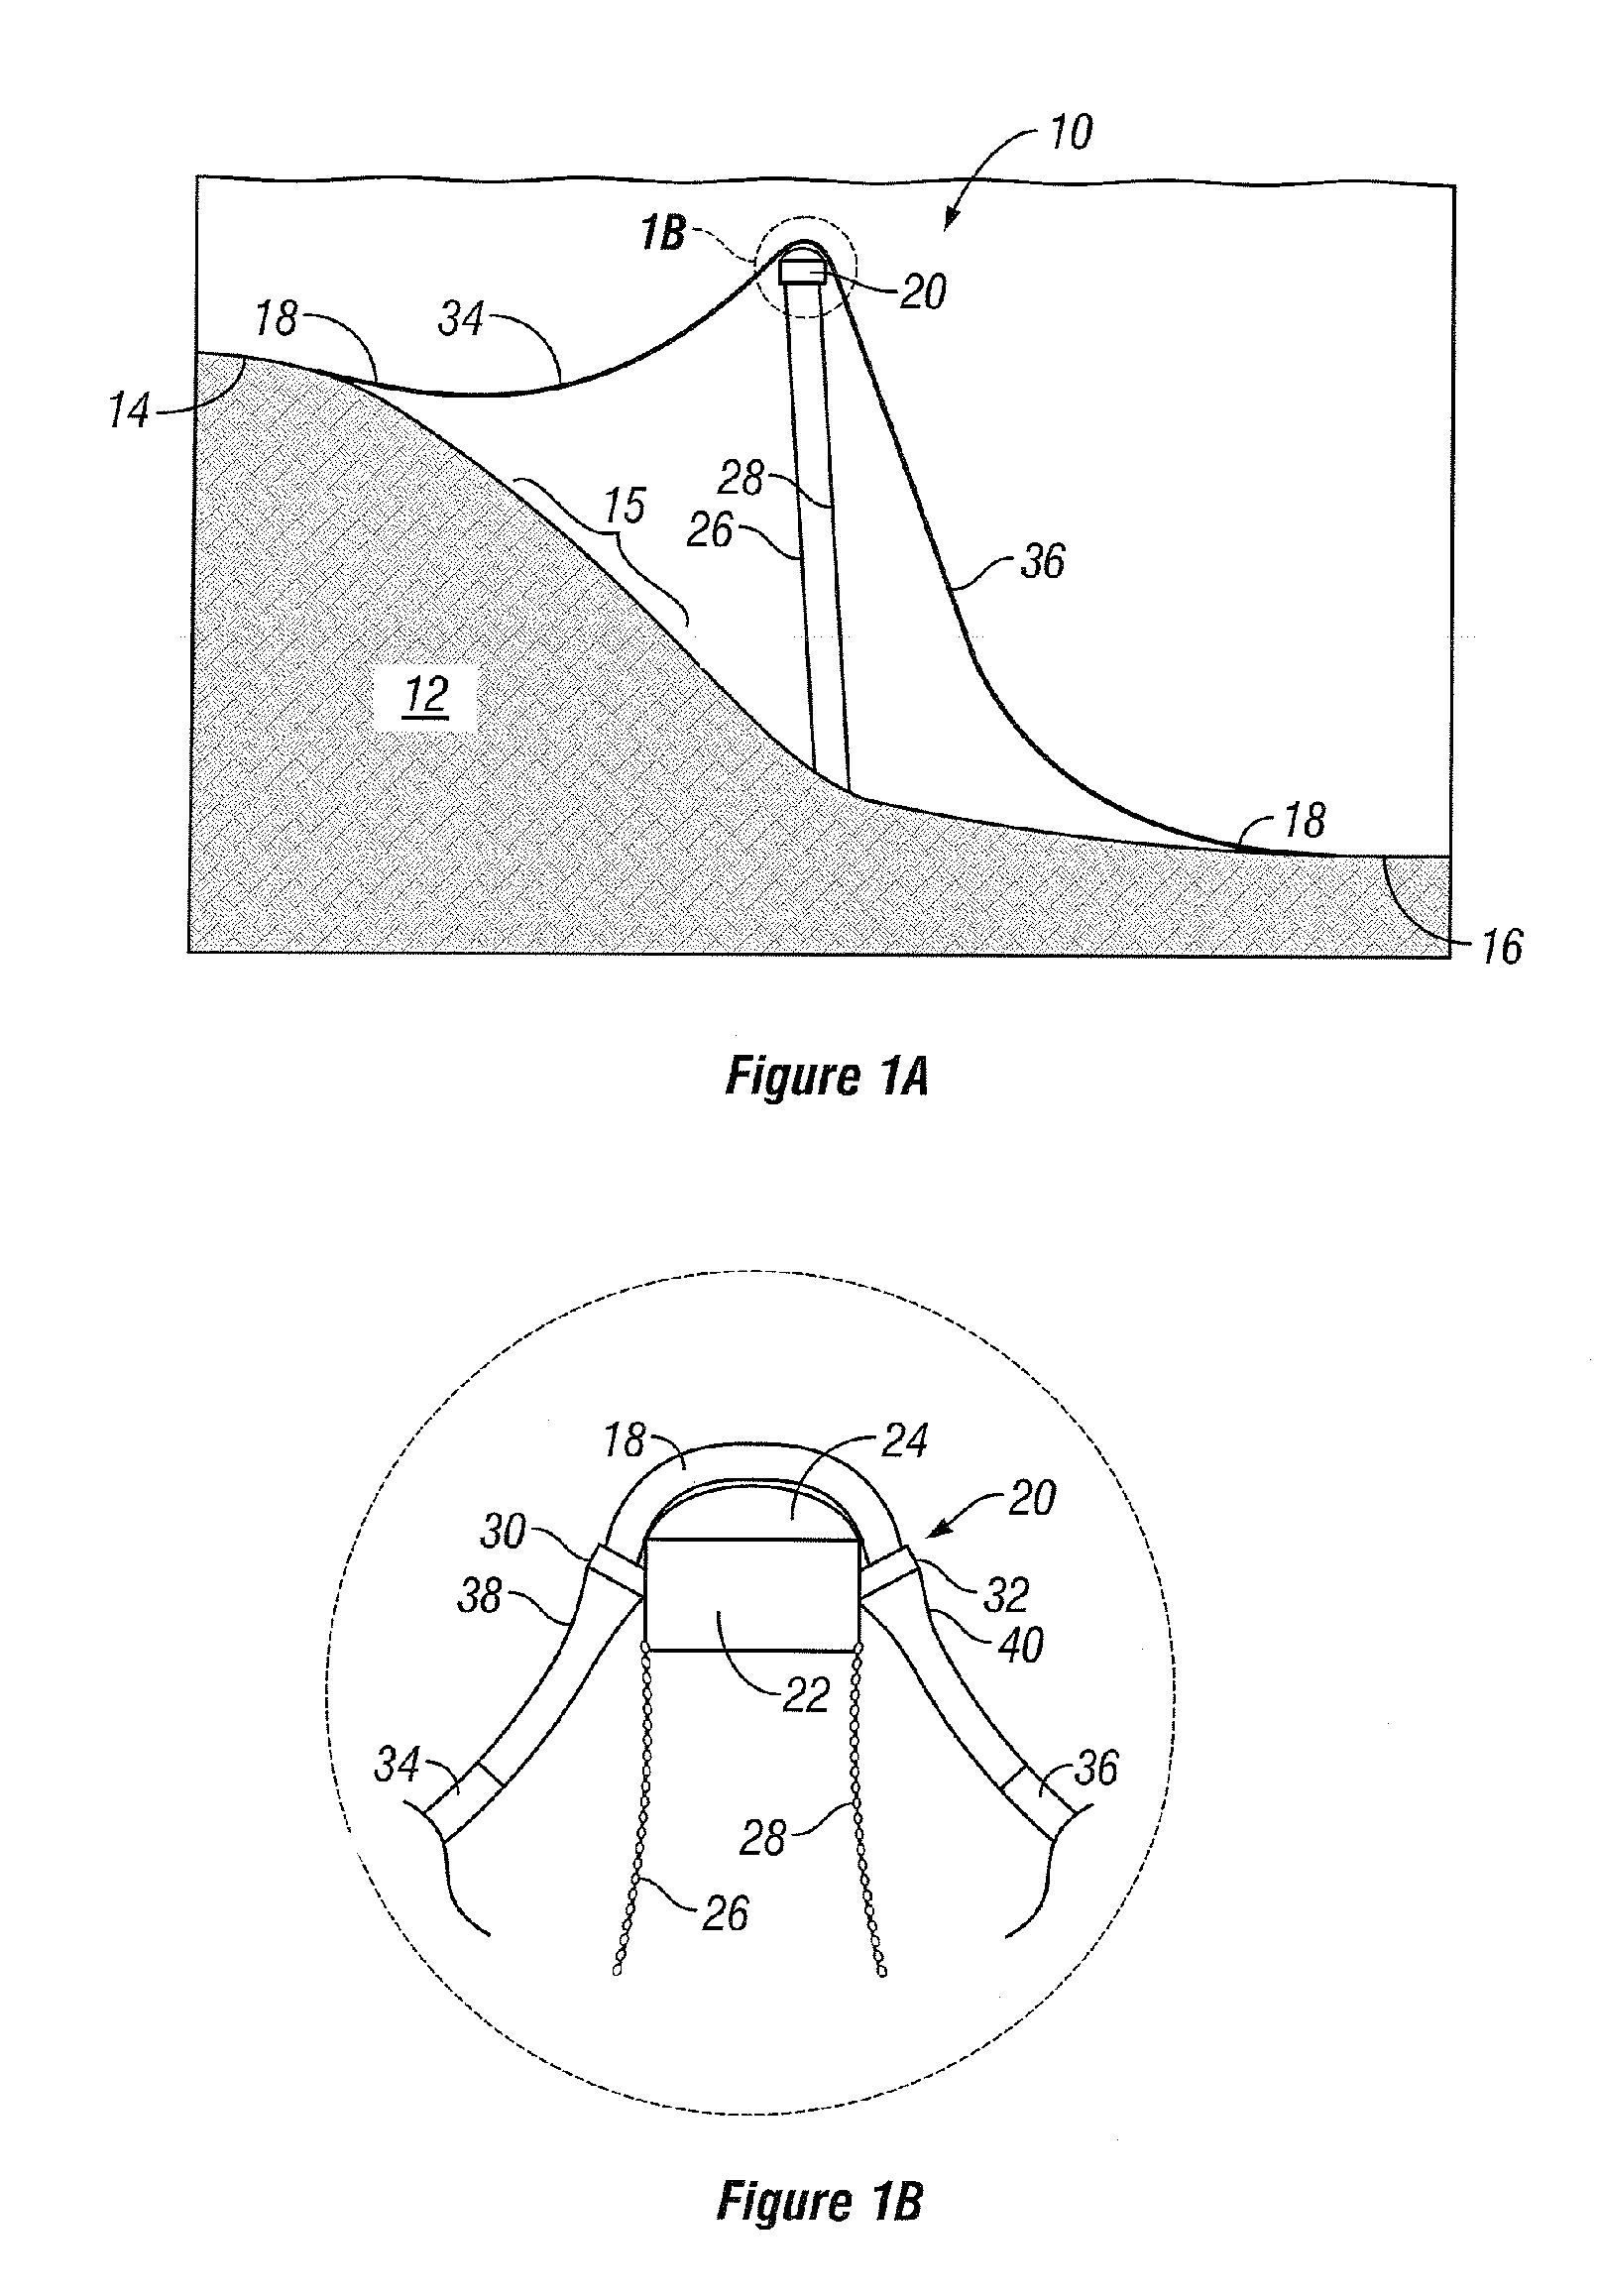 Concentrated buoyancy subsea pipeline apparatus and method